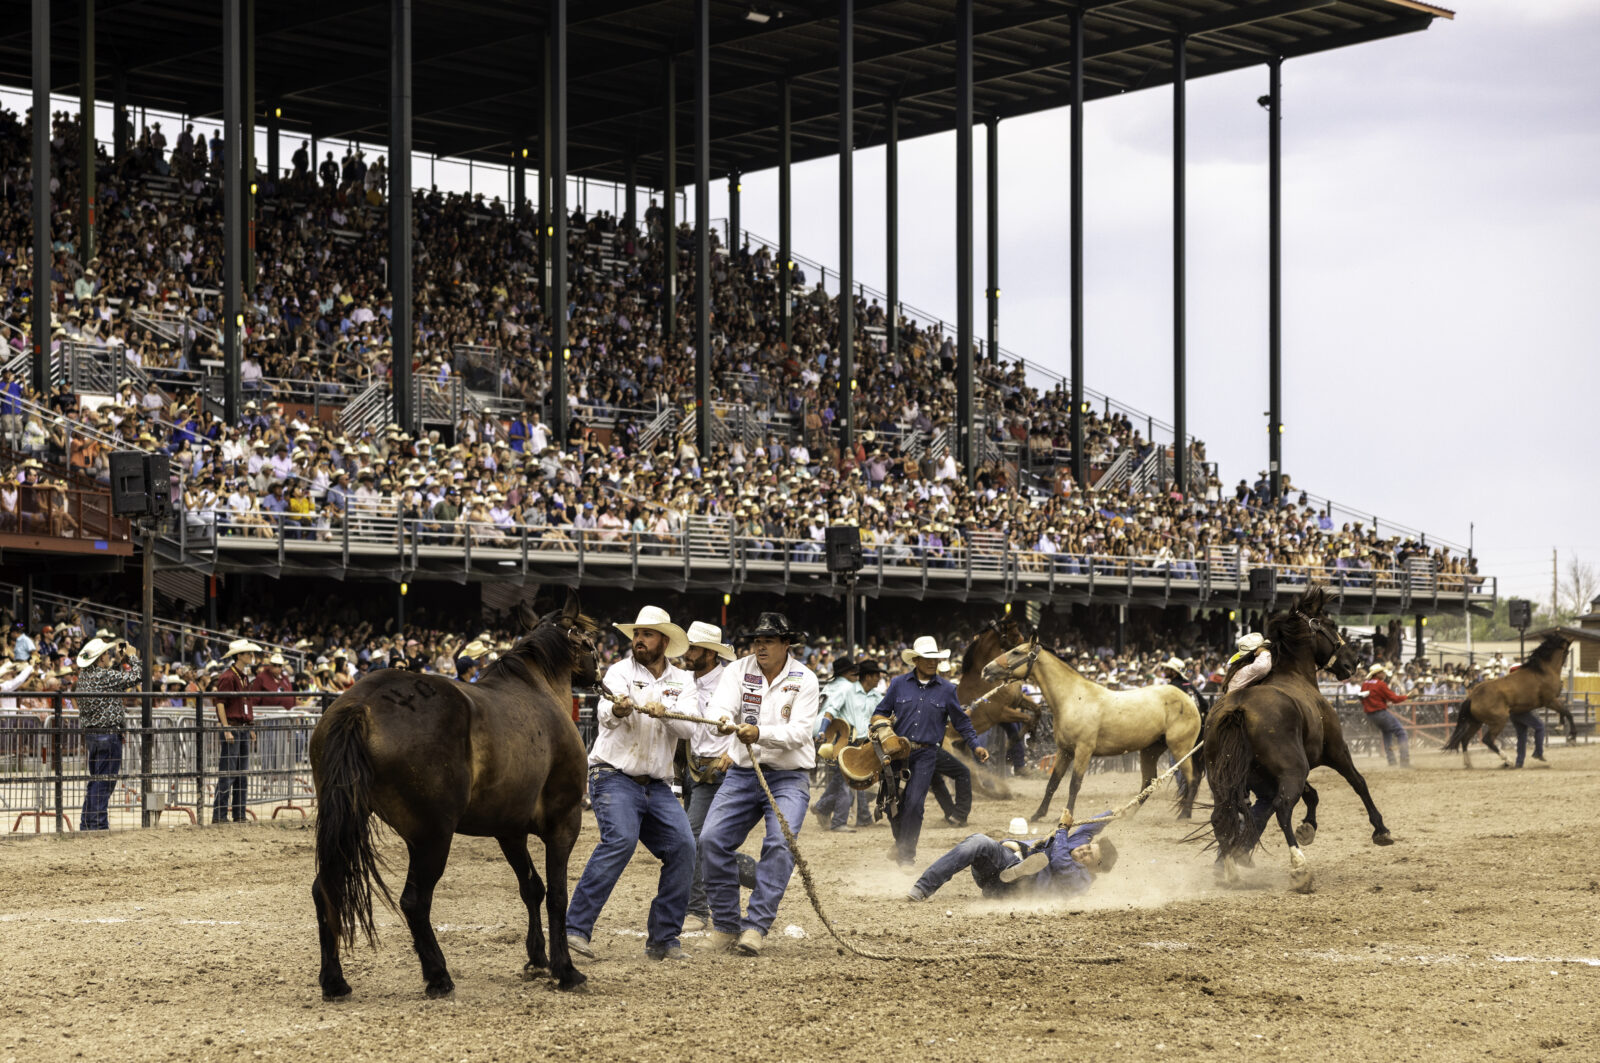 The Rodeo: Wild Horse Race